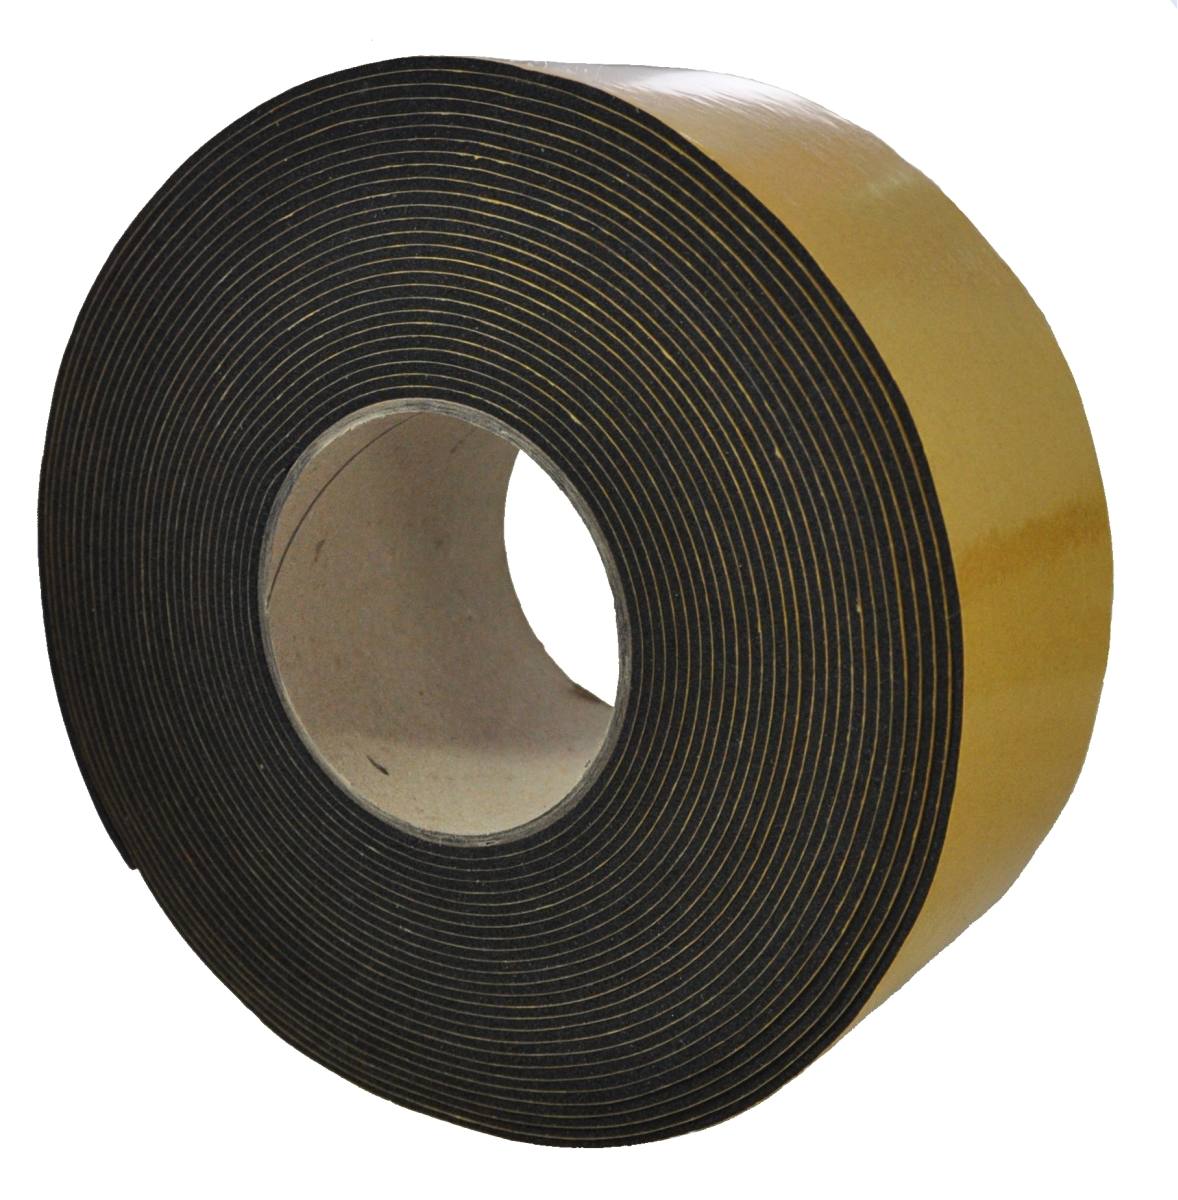 S-K-S EPDM 2mmx15mmx10m black self-adhesive on one side